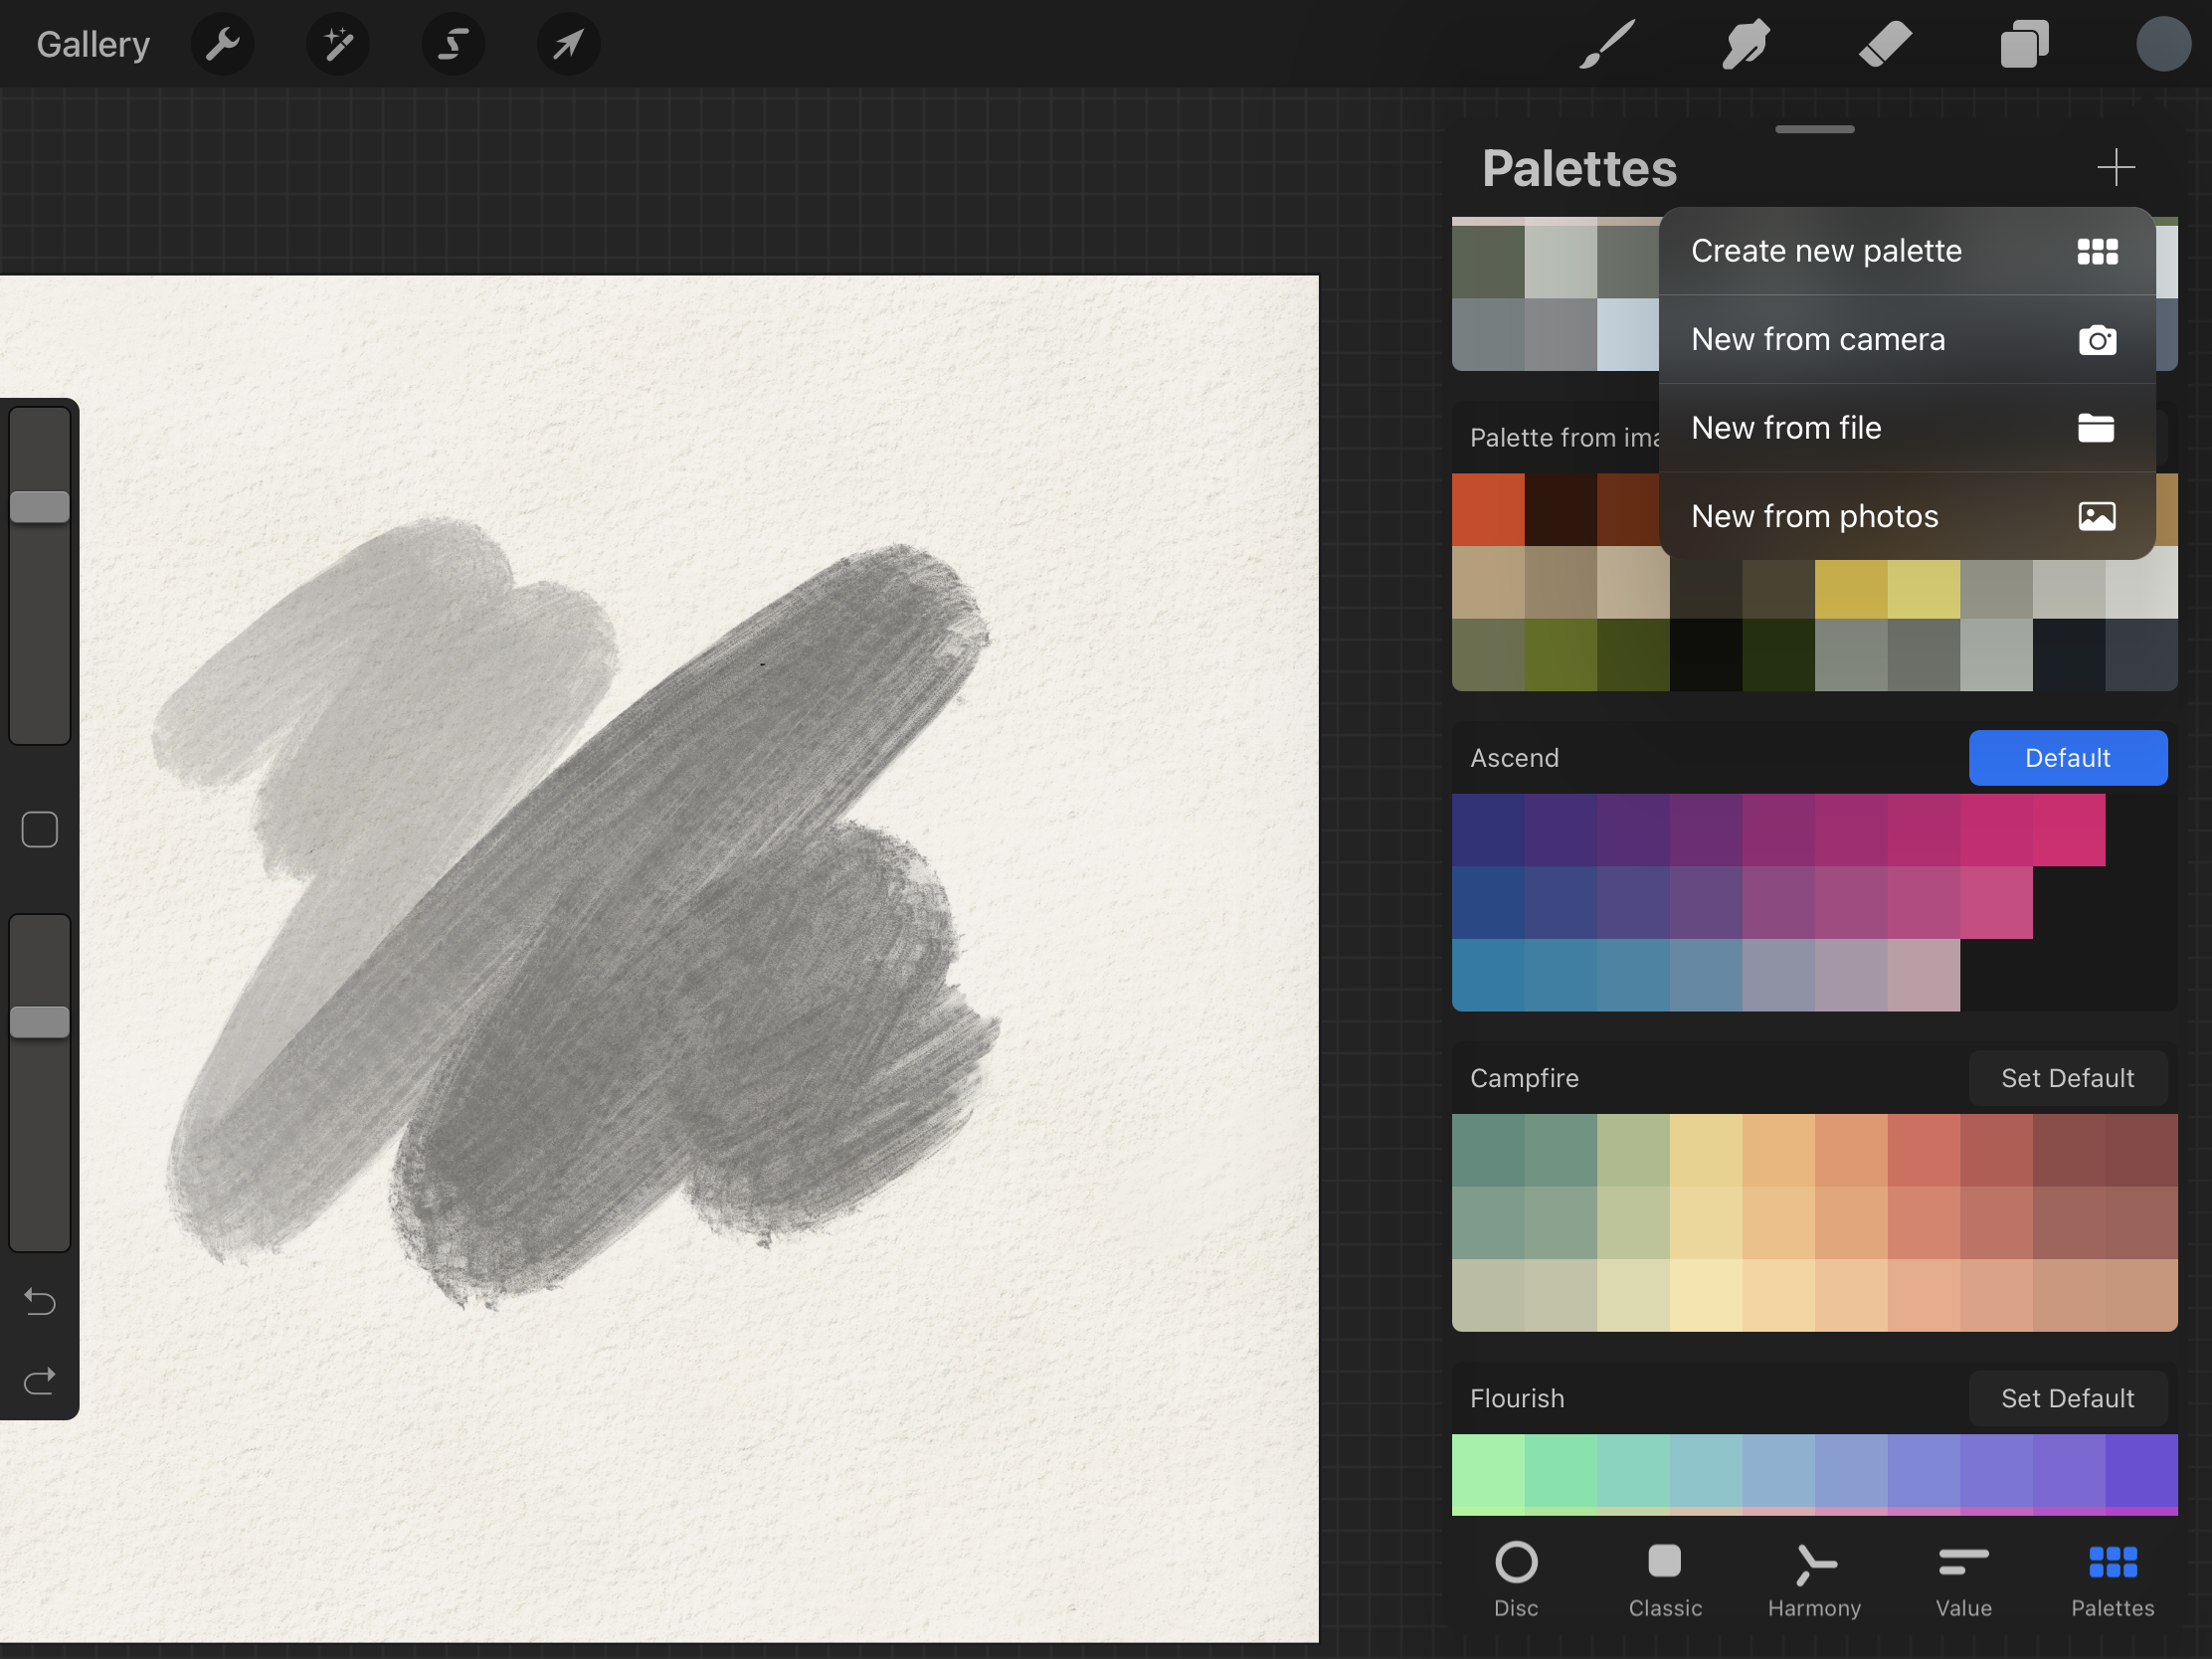 It shows how to add and edit palettes of the application.